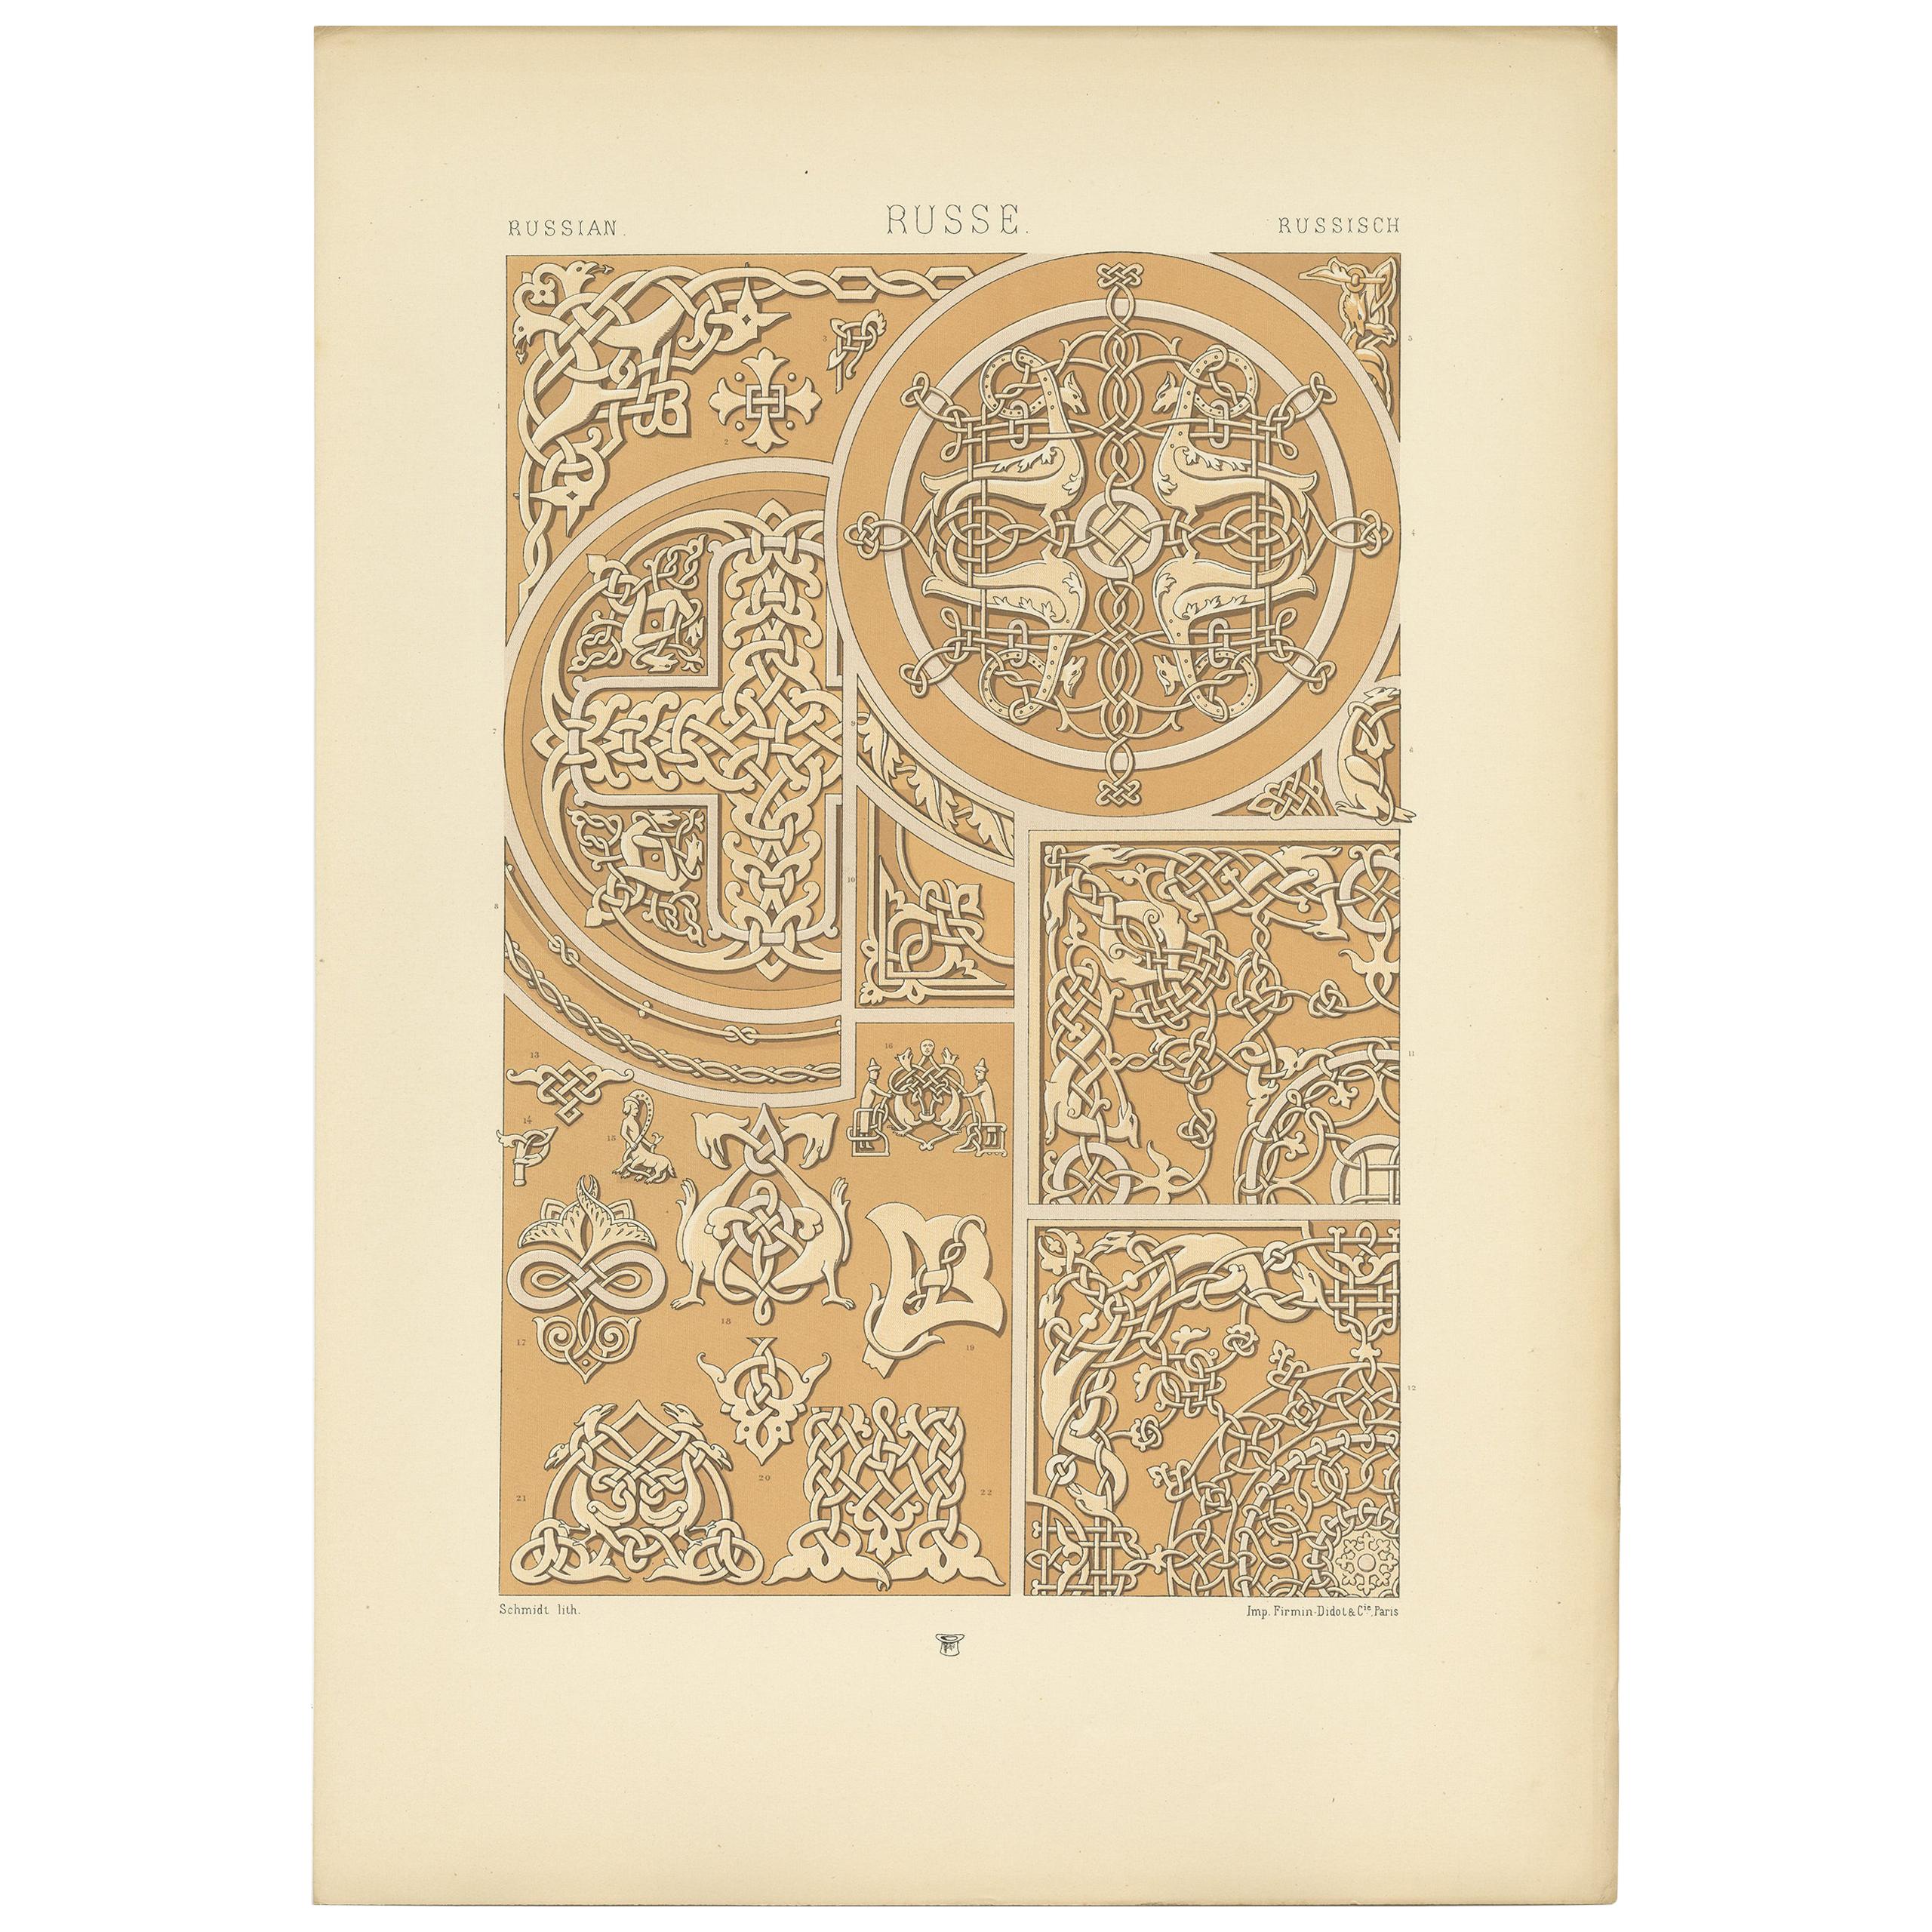 Pl. 66 Antique Print of Russian Motifs from Metalwork and Manuscripts by Racinet